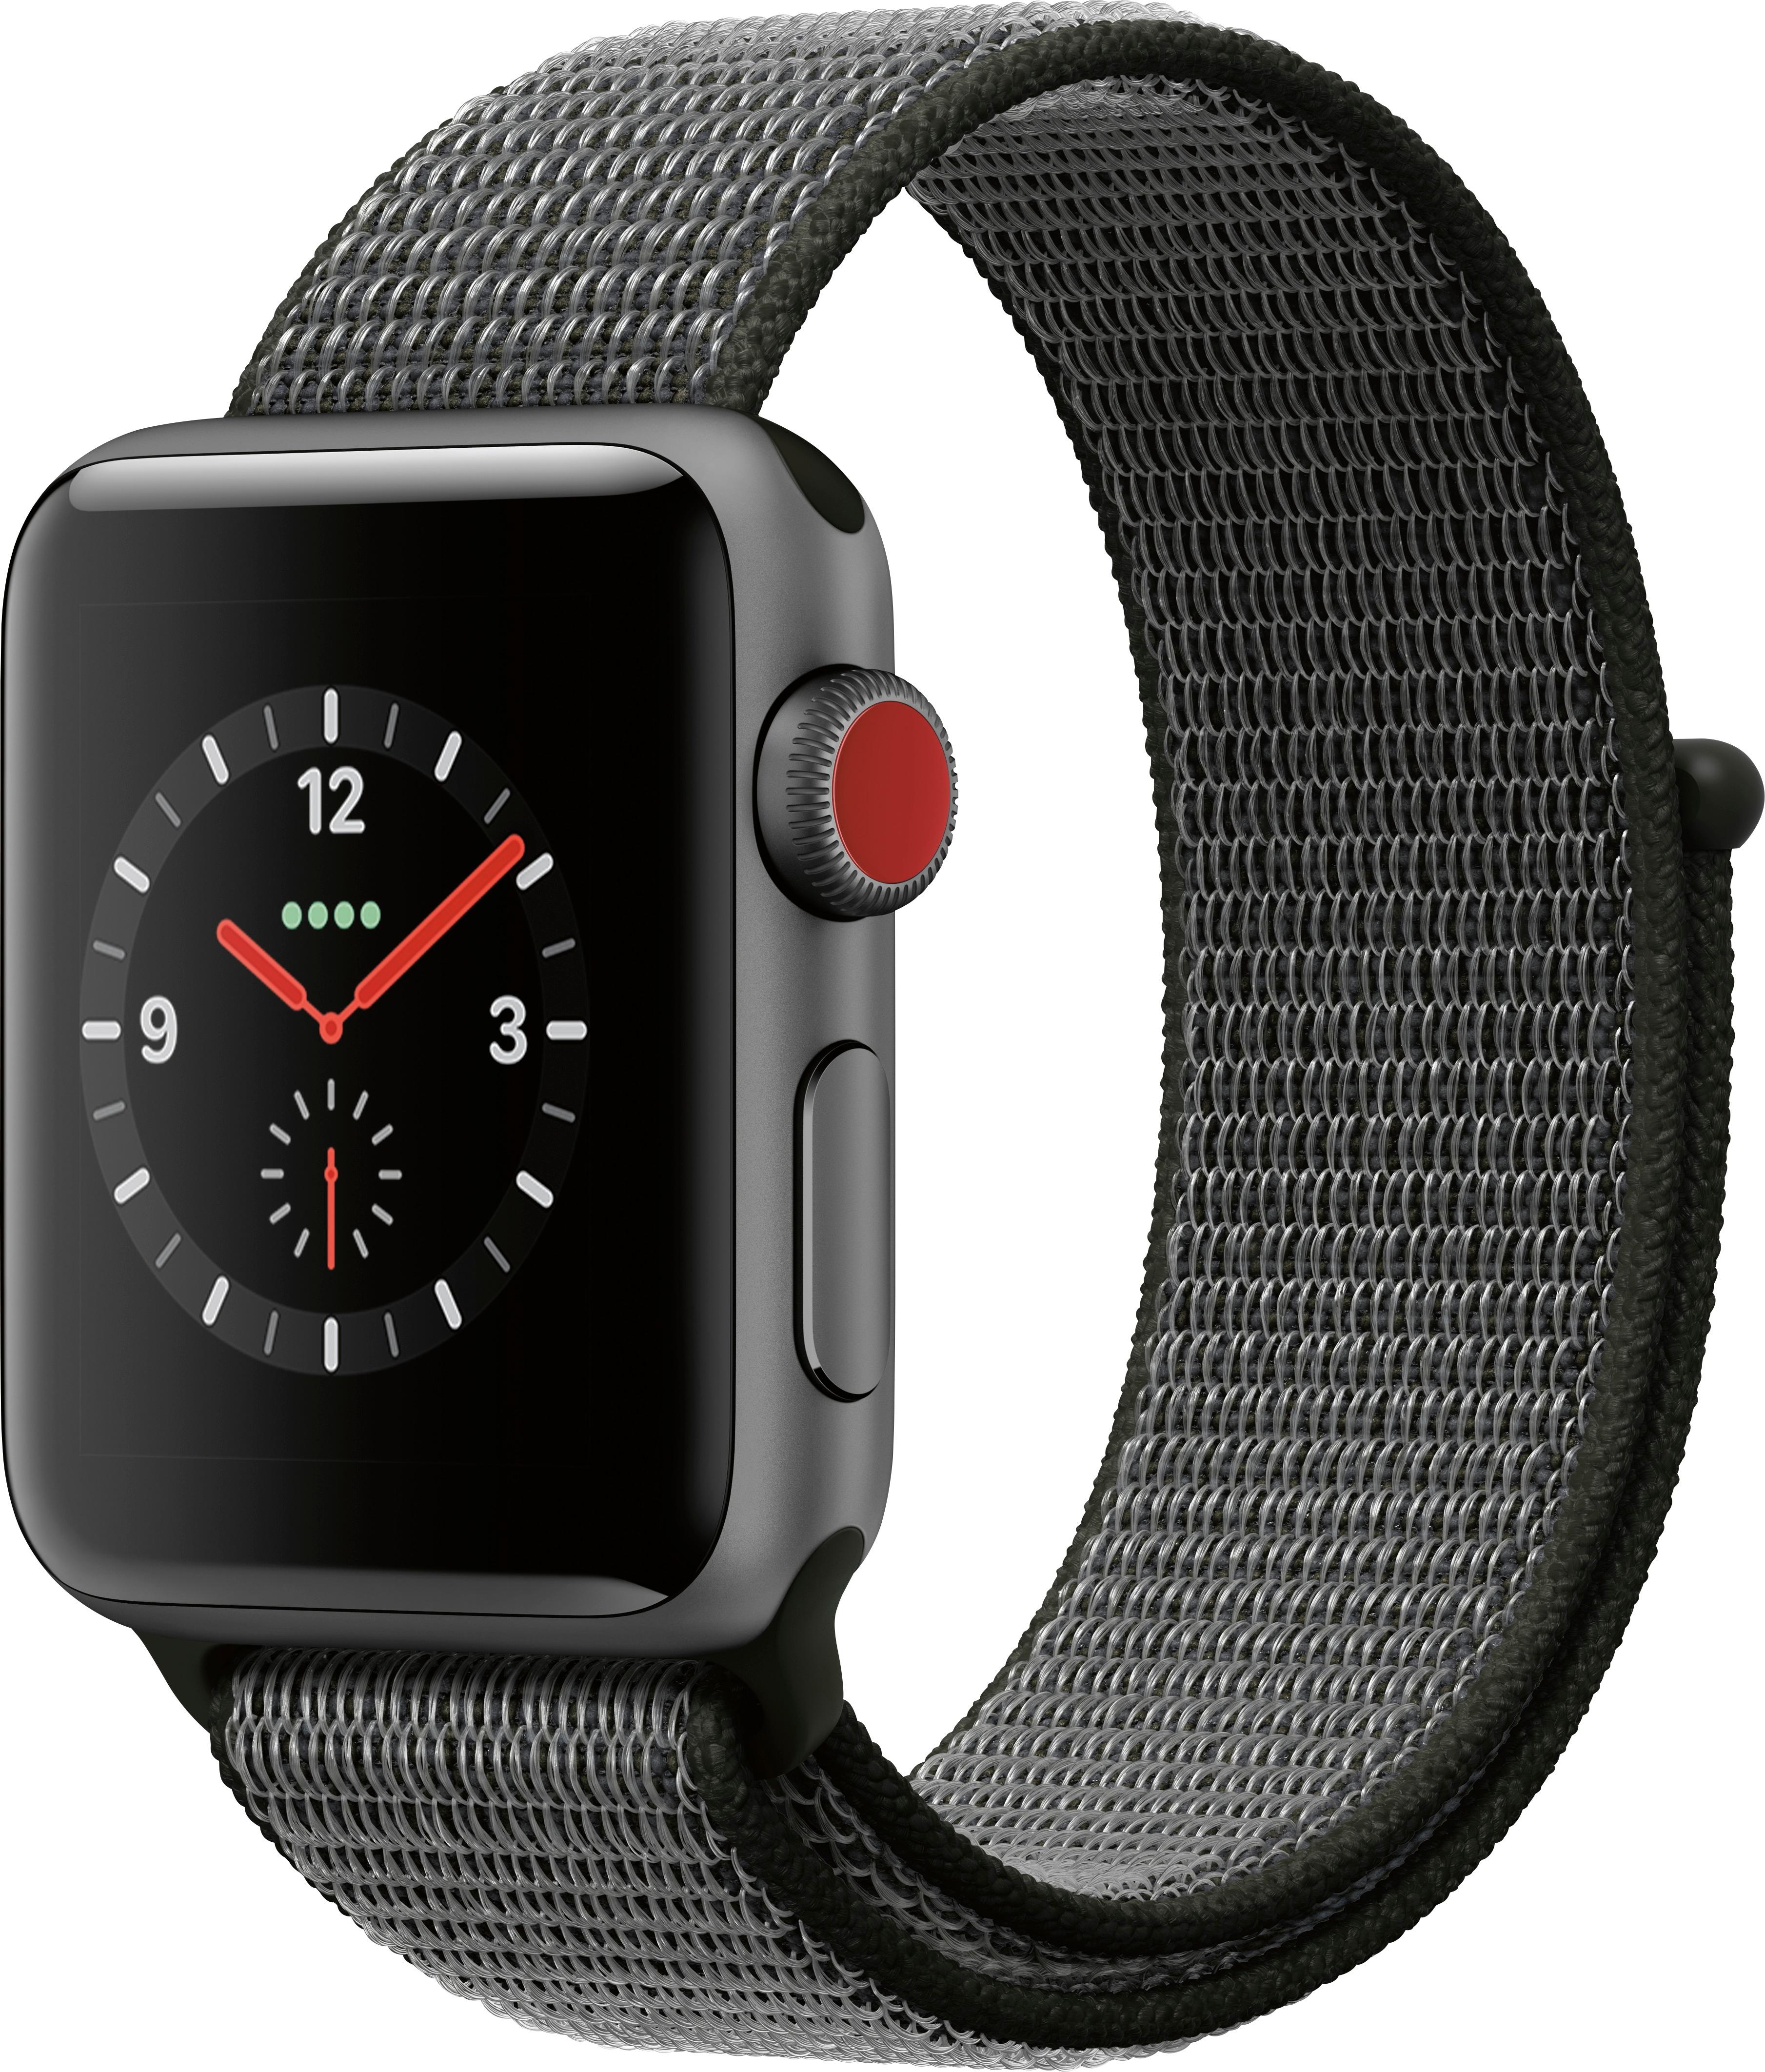 Angle View: Apple Watch SE (GPS + Cellular) 40mm Space Gray Aluminum Case with Tornado/Gray Sport Loop - Space Gray